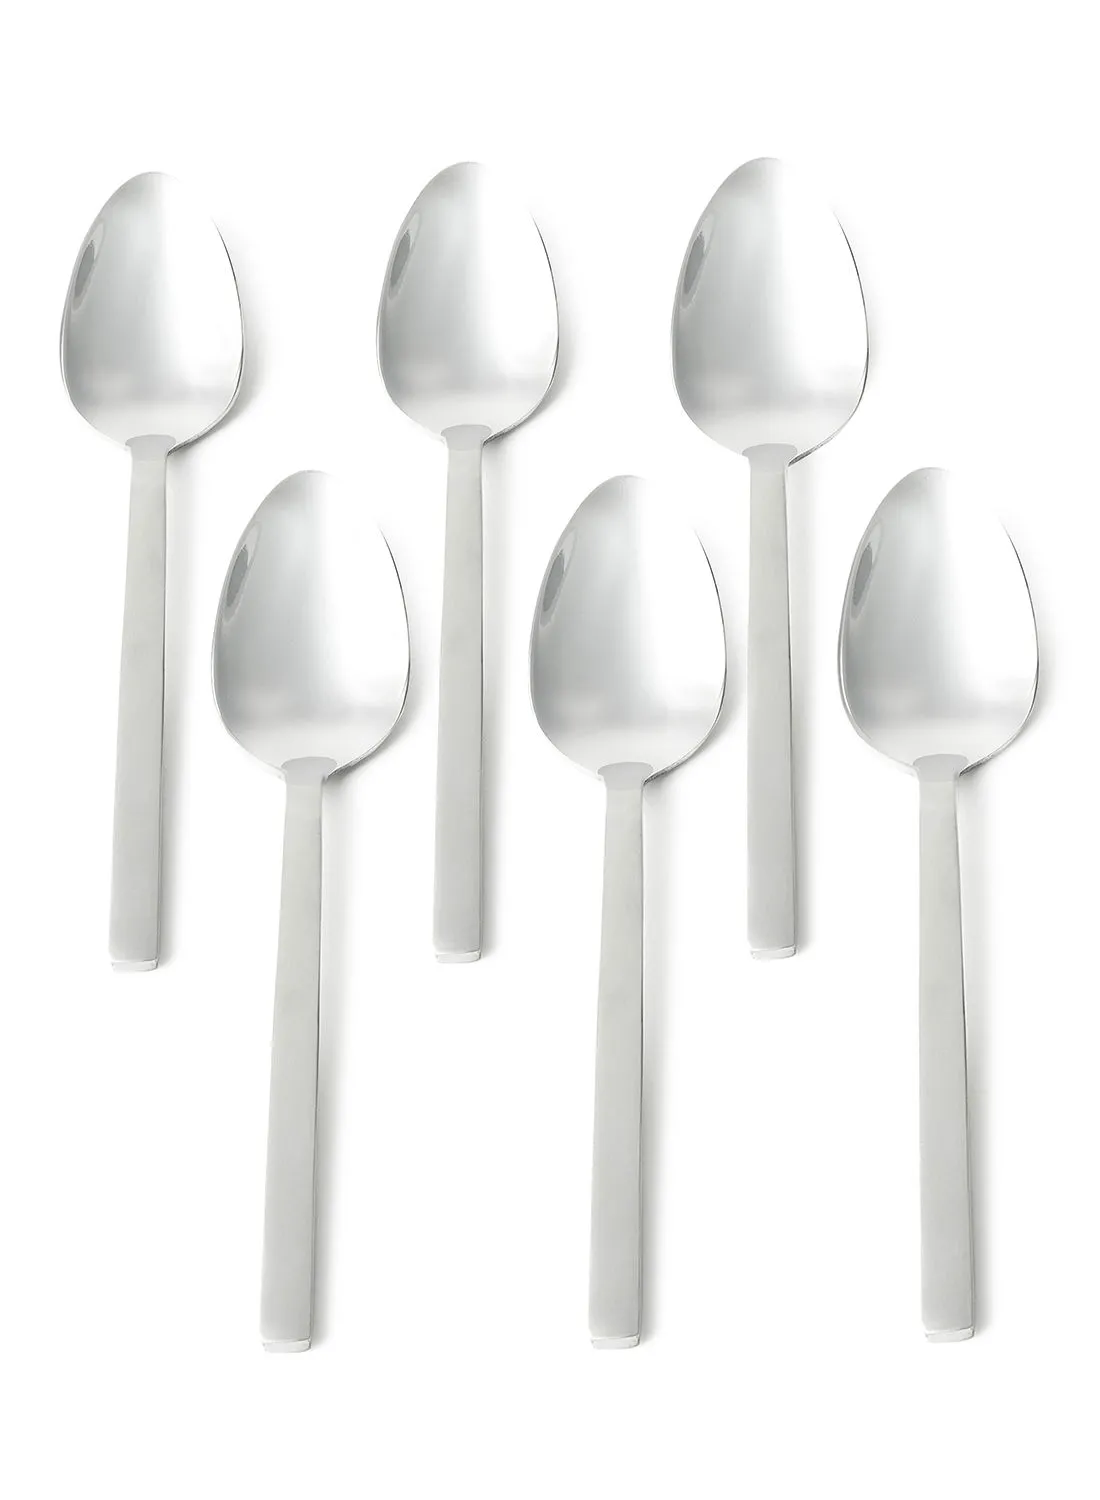 noon east 6 Piece Tablespoons Set - Made Of Stainless Steel - Silverware Flatware - Spoons - Spoon Set - Table Spoons - Serves 6 - Design Silver Lyra